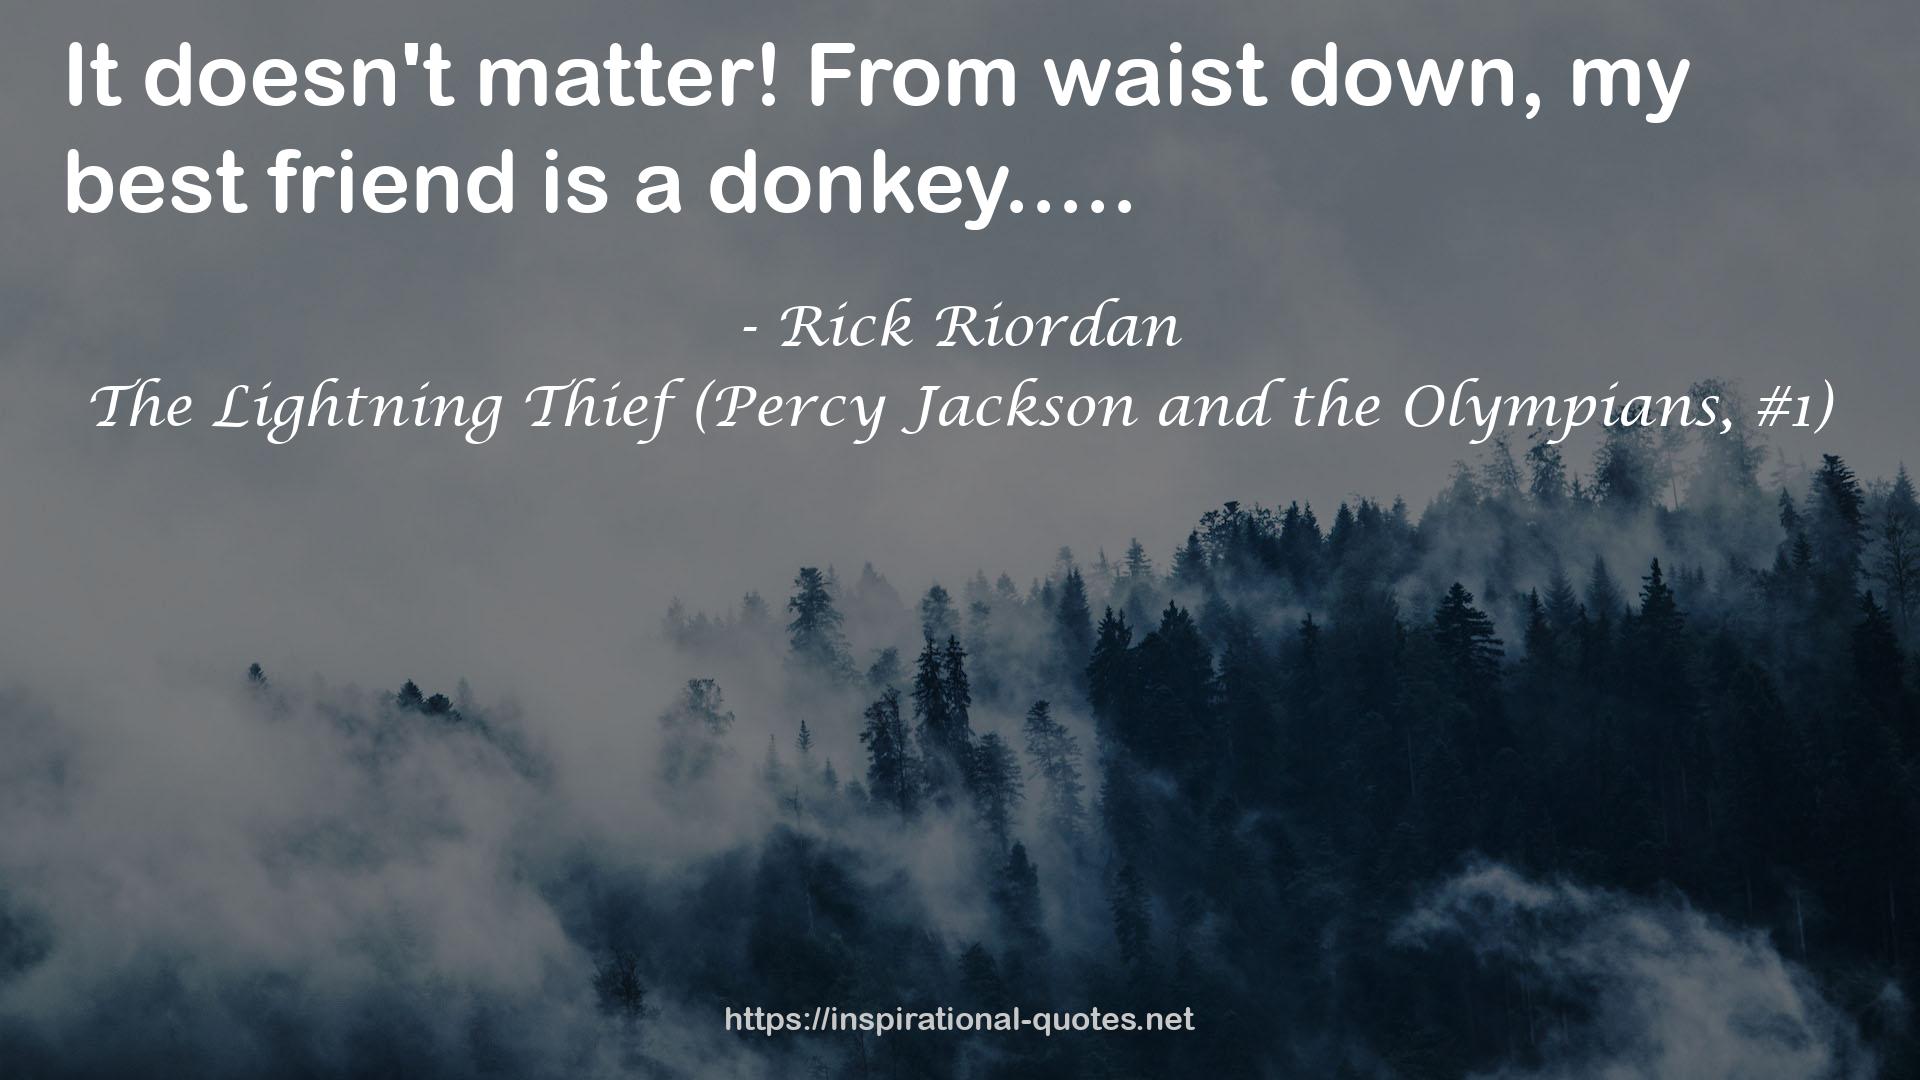 The Lightning Thief (Percy Jackson and the Olympians, #1) QUOTES